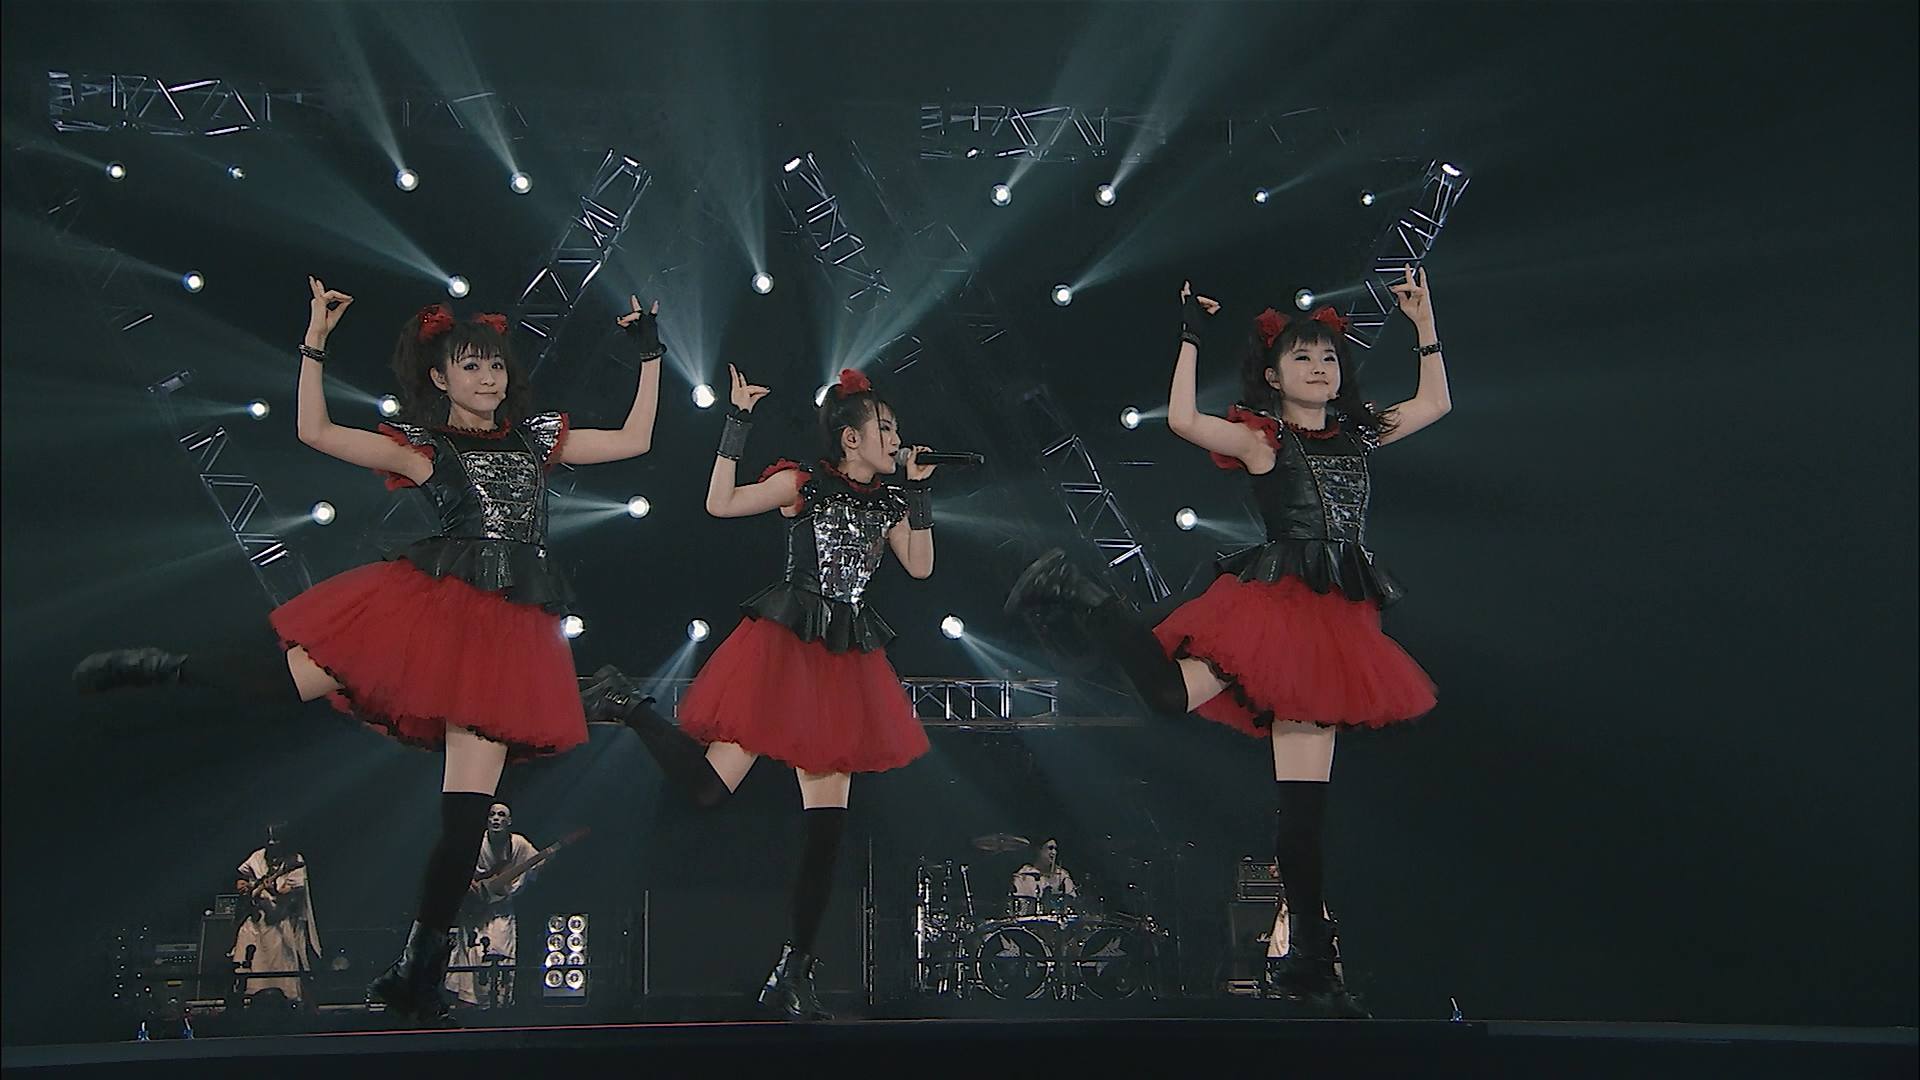 BABYMETAL performing Catch Me If You Can